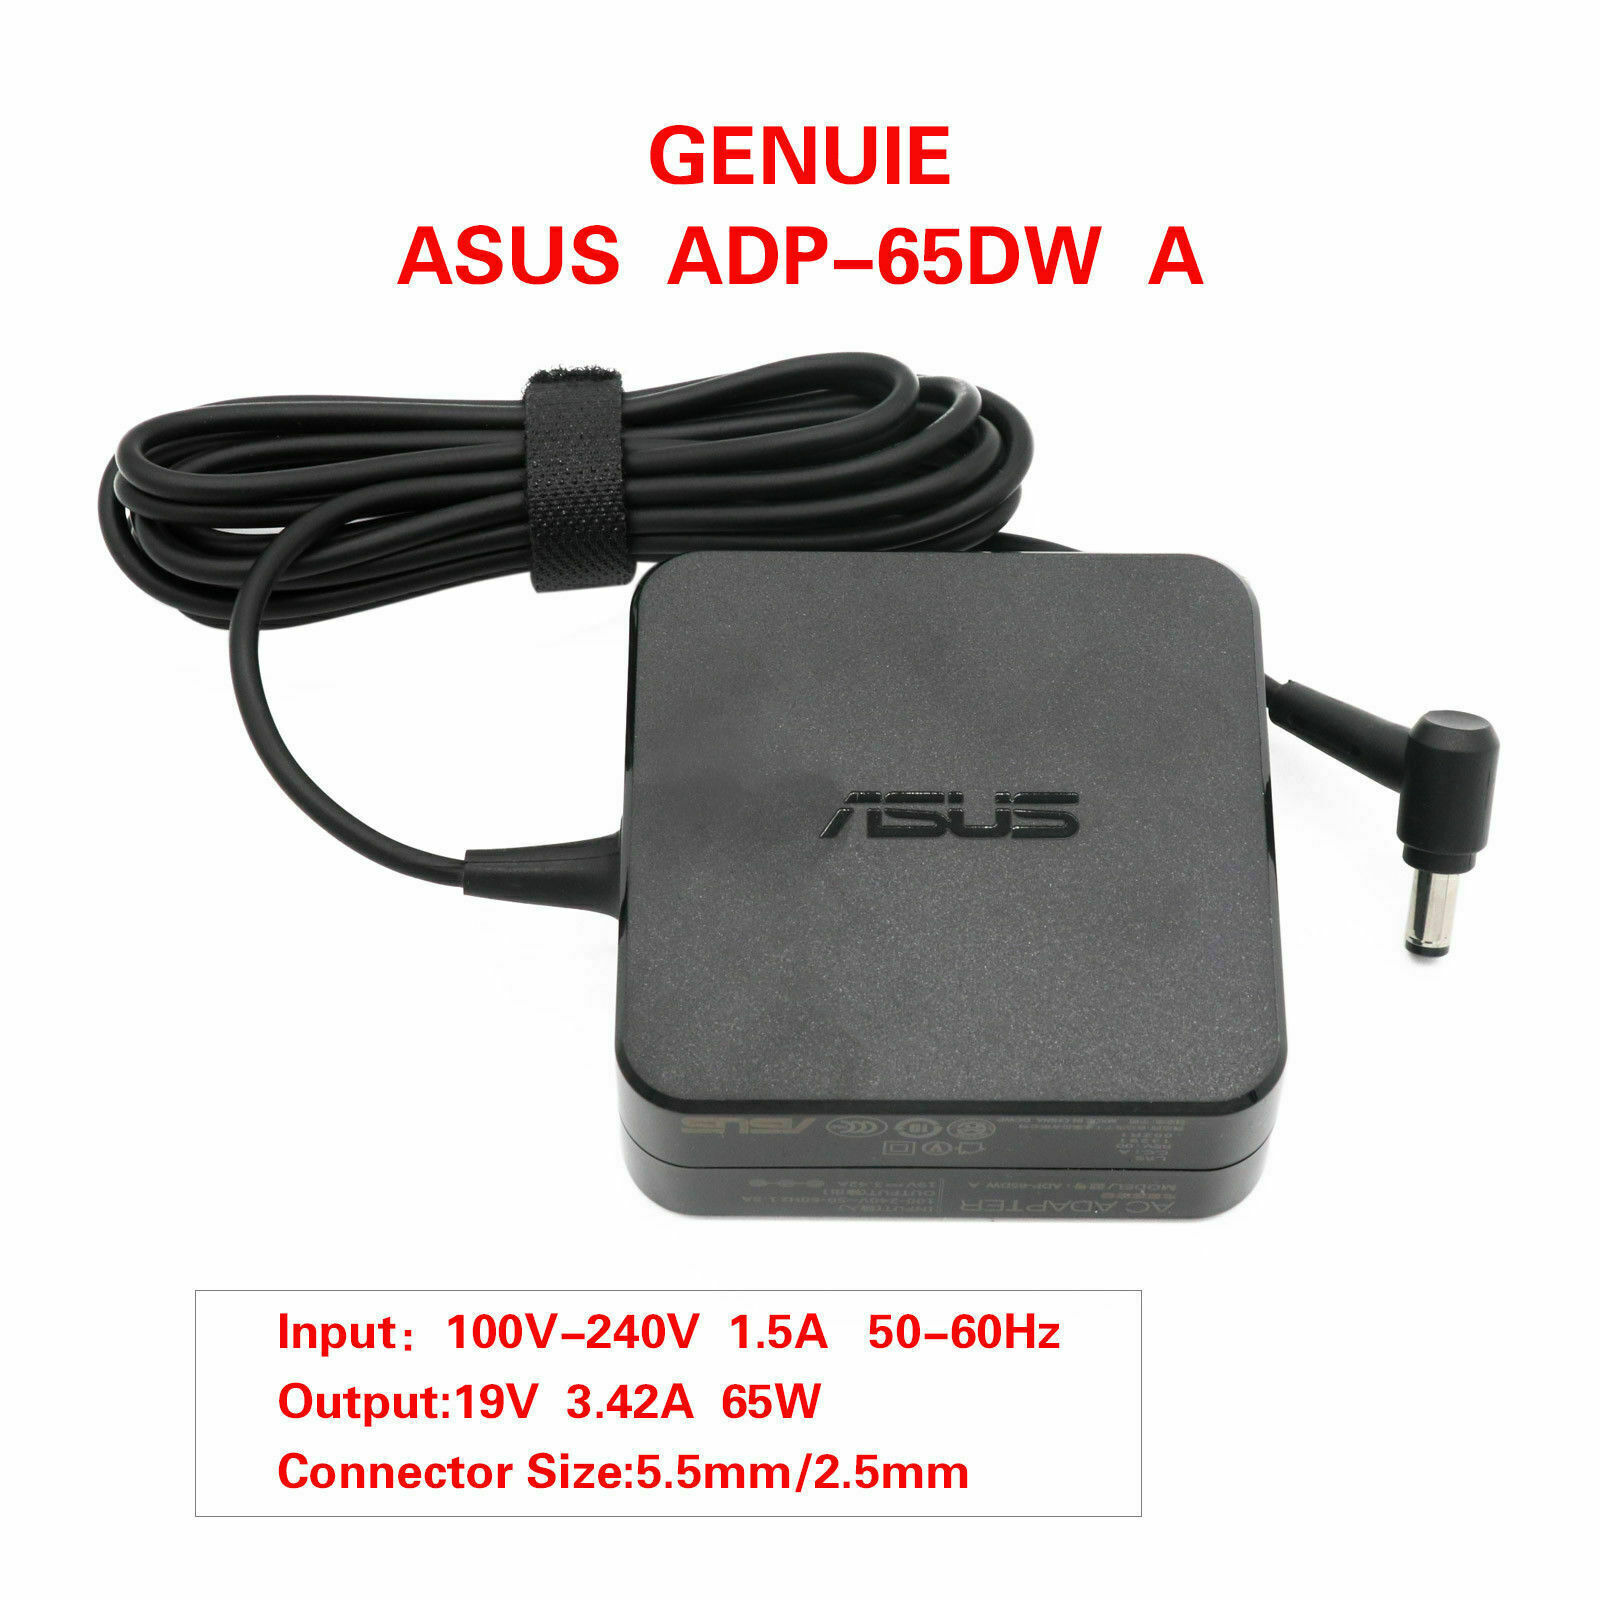 NEW Genuine ASUS Laptop Charger AC Adapter Power Supply ADP-65GD 19V 3.42A 65W